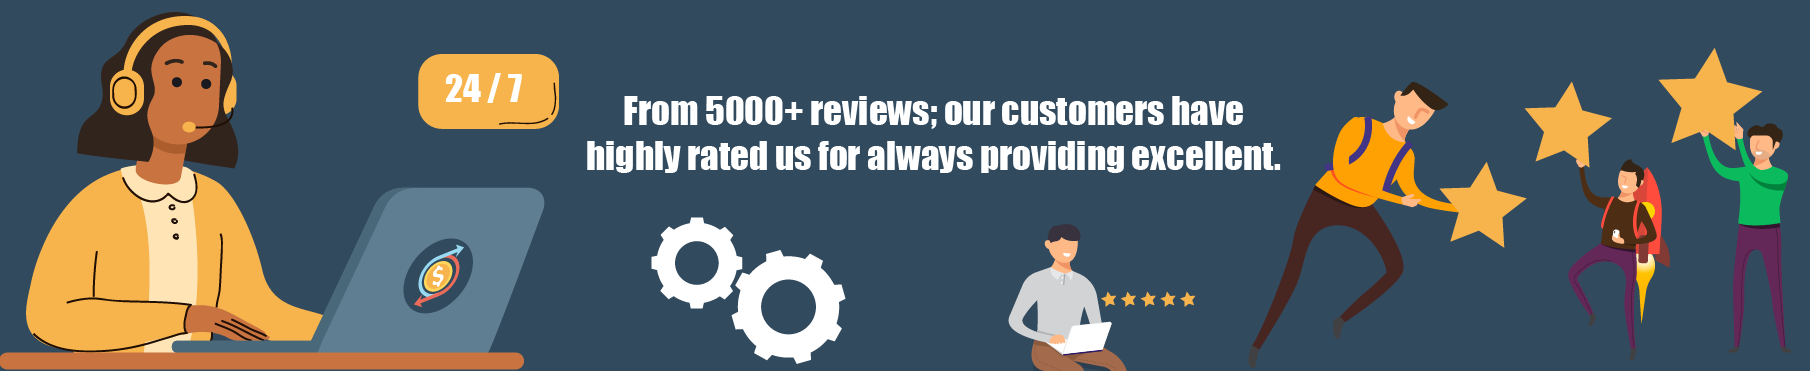 We have an Average Rating of 4.8 from Over 5000 Reviews with a Satisfaction Rate